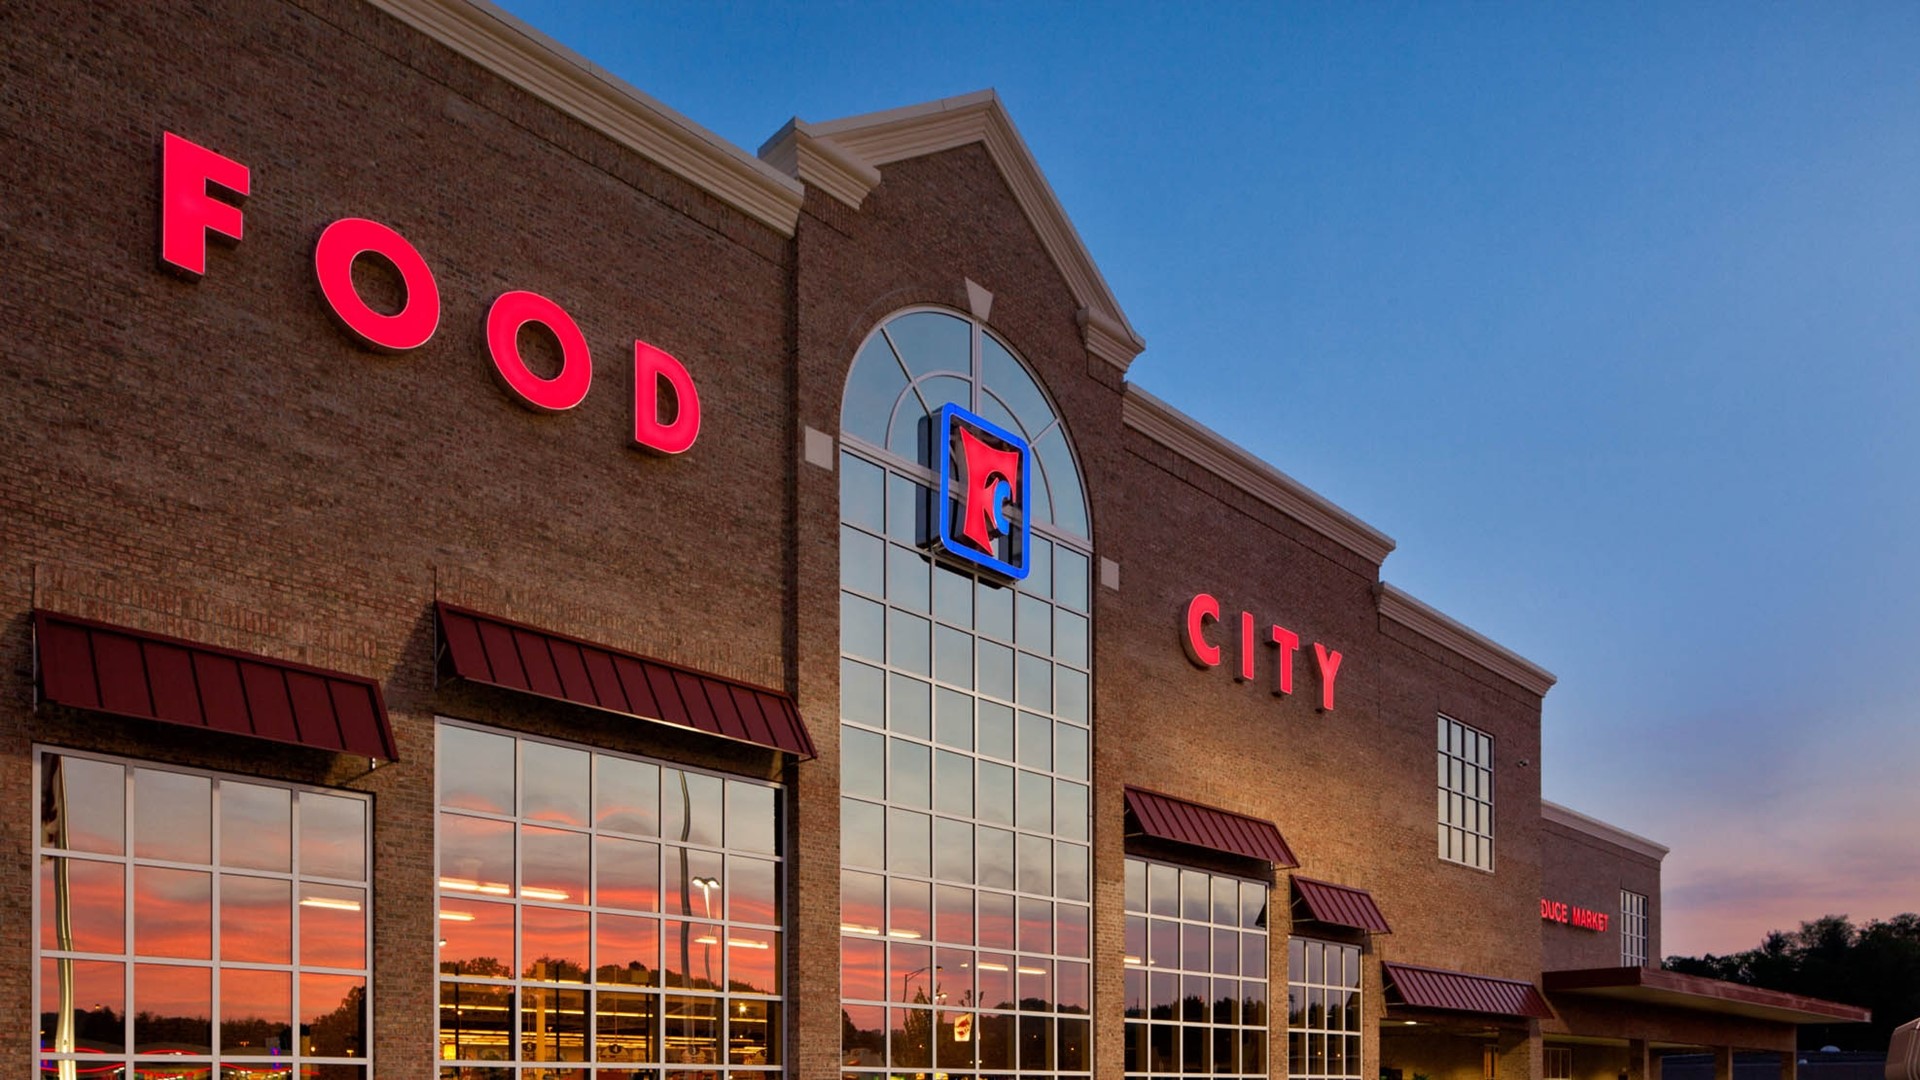 Today was the groundbreaking for the first of six Food City stores in Huntsville.